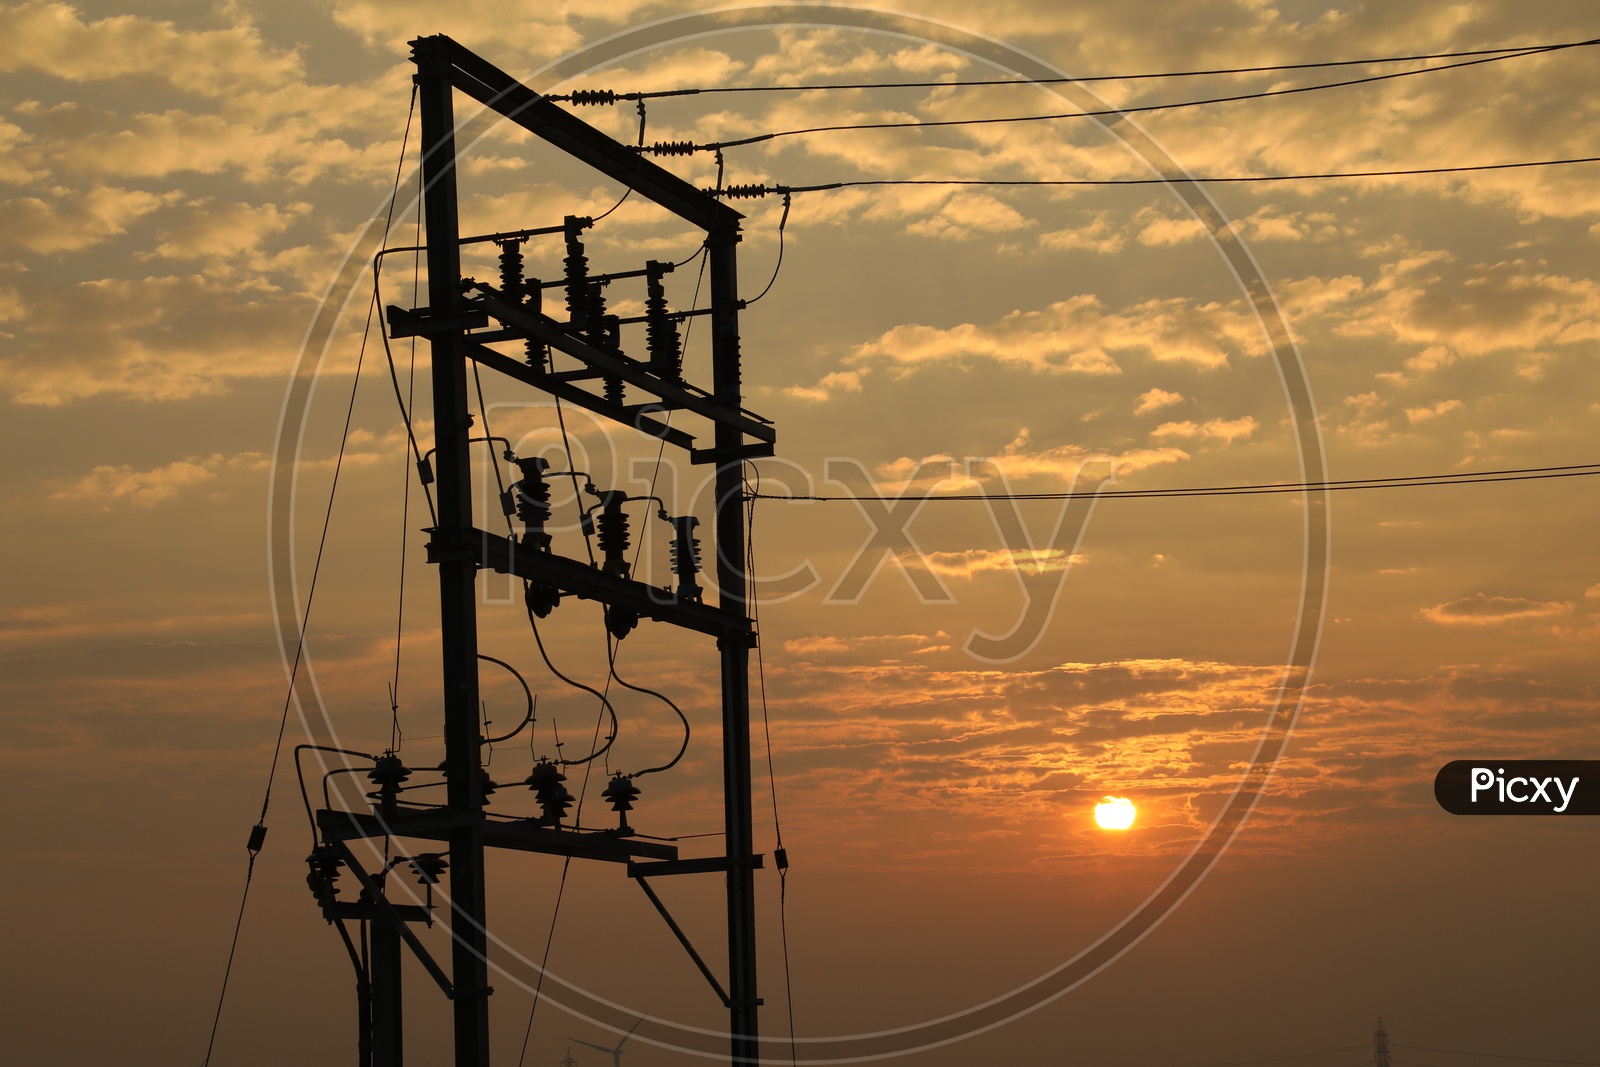 Sunset with electrical transformer in foreground